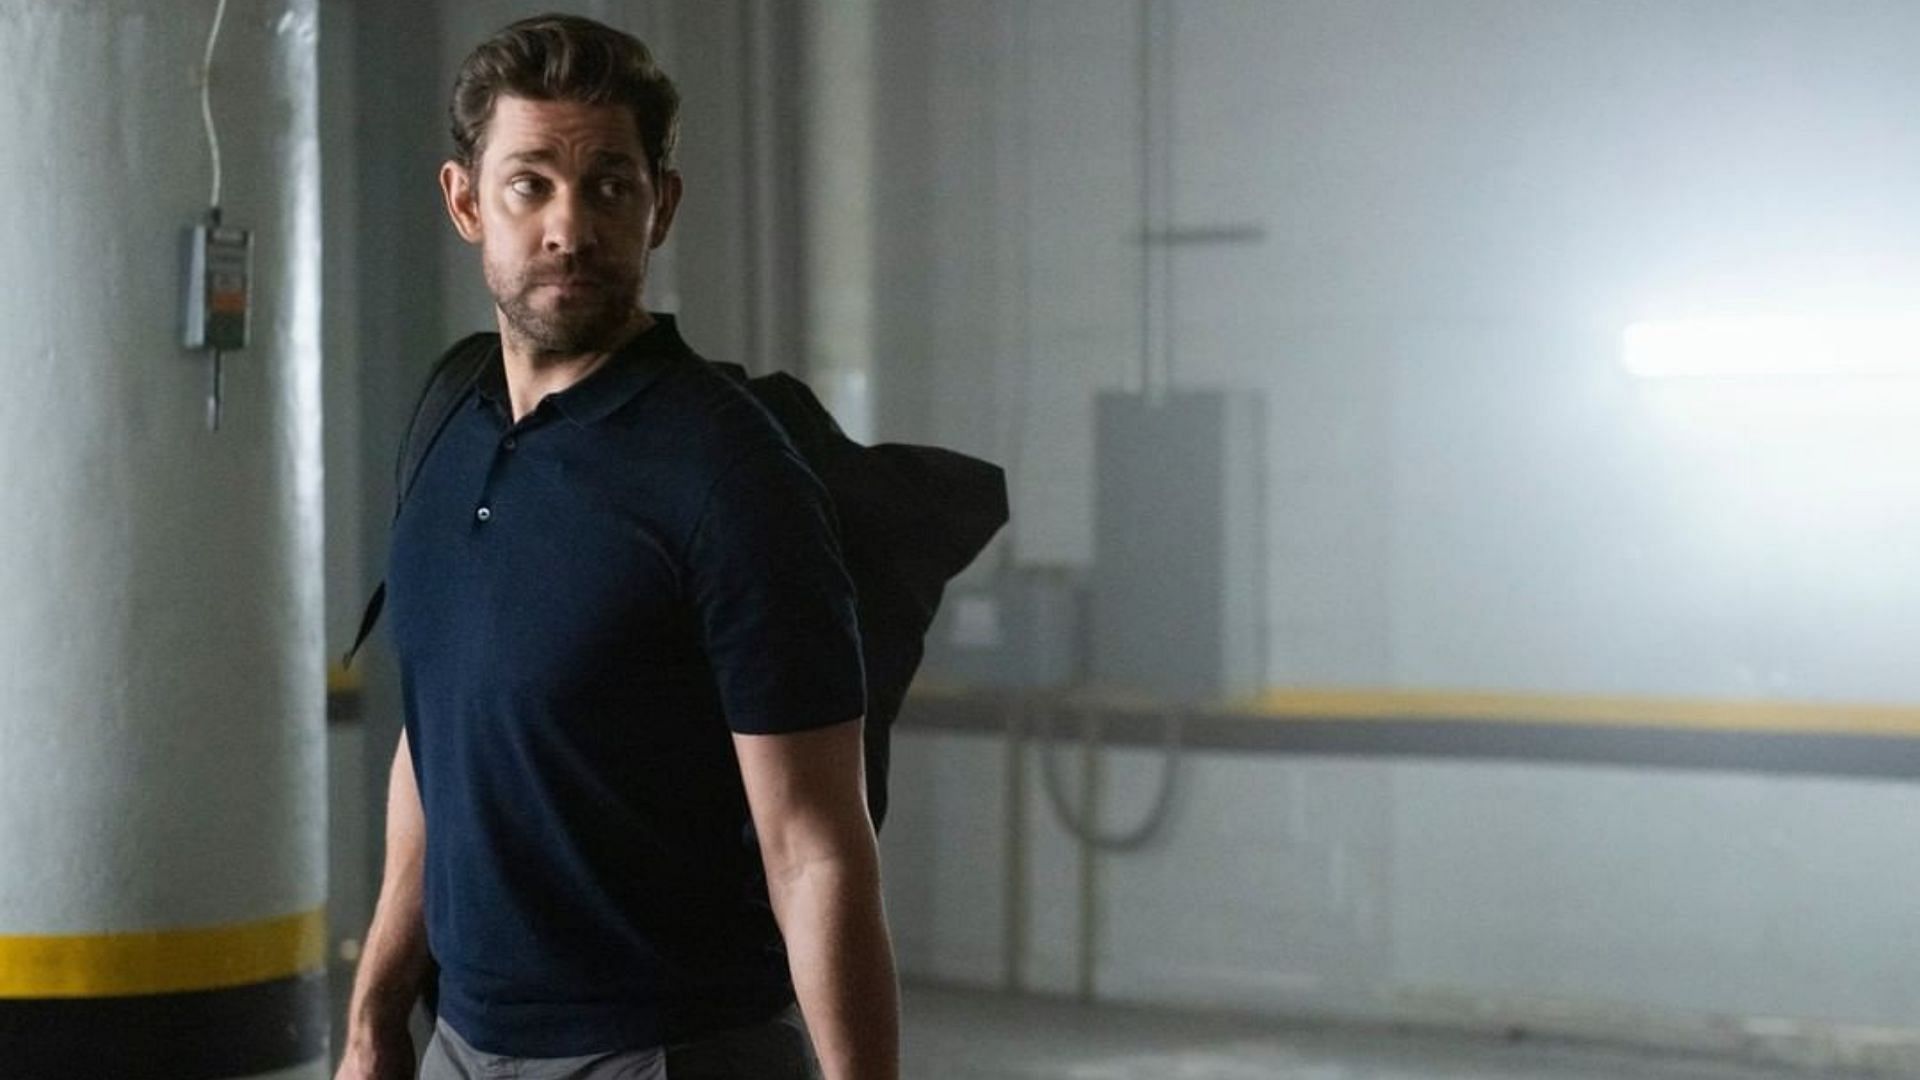 Jack Ryan Season 3 Release date, plot, number of episodes, and more